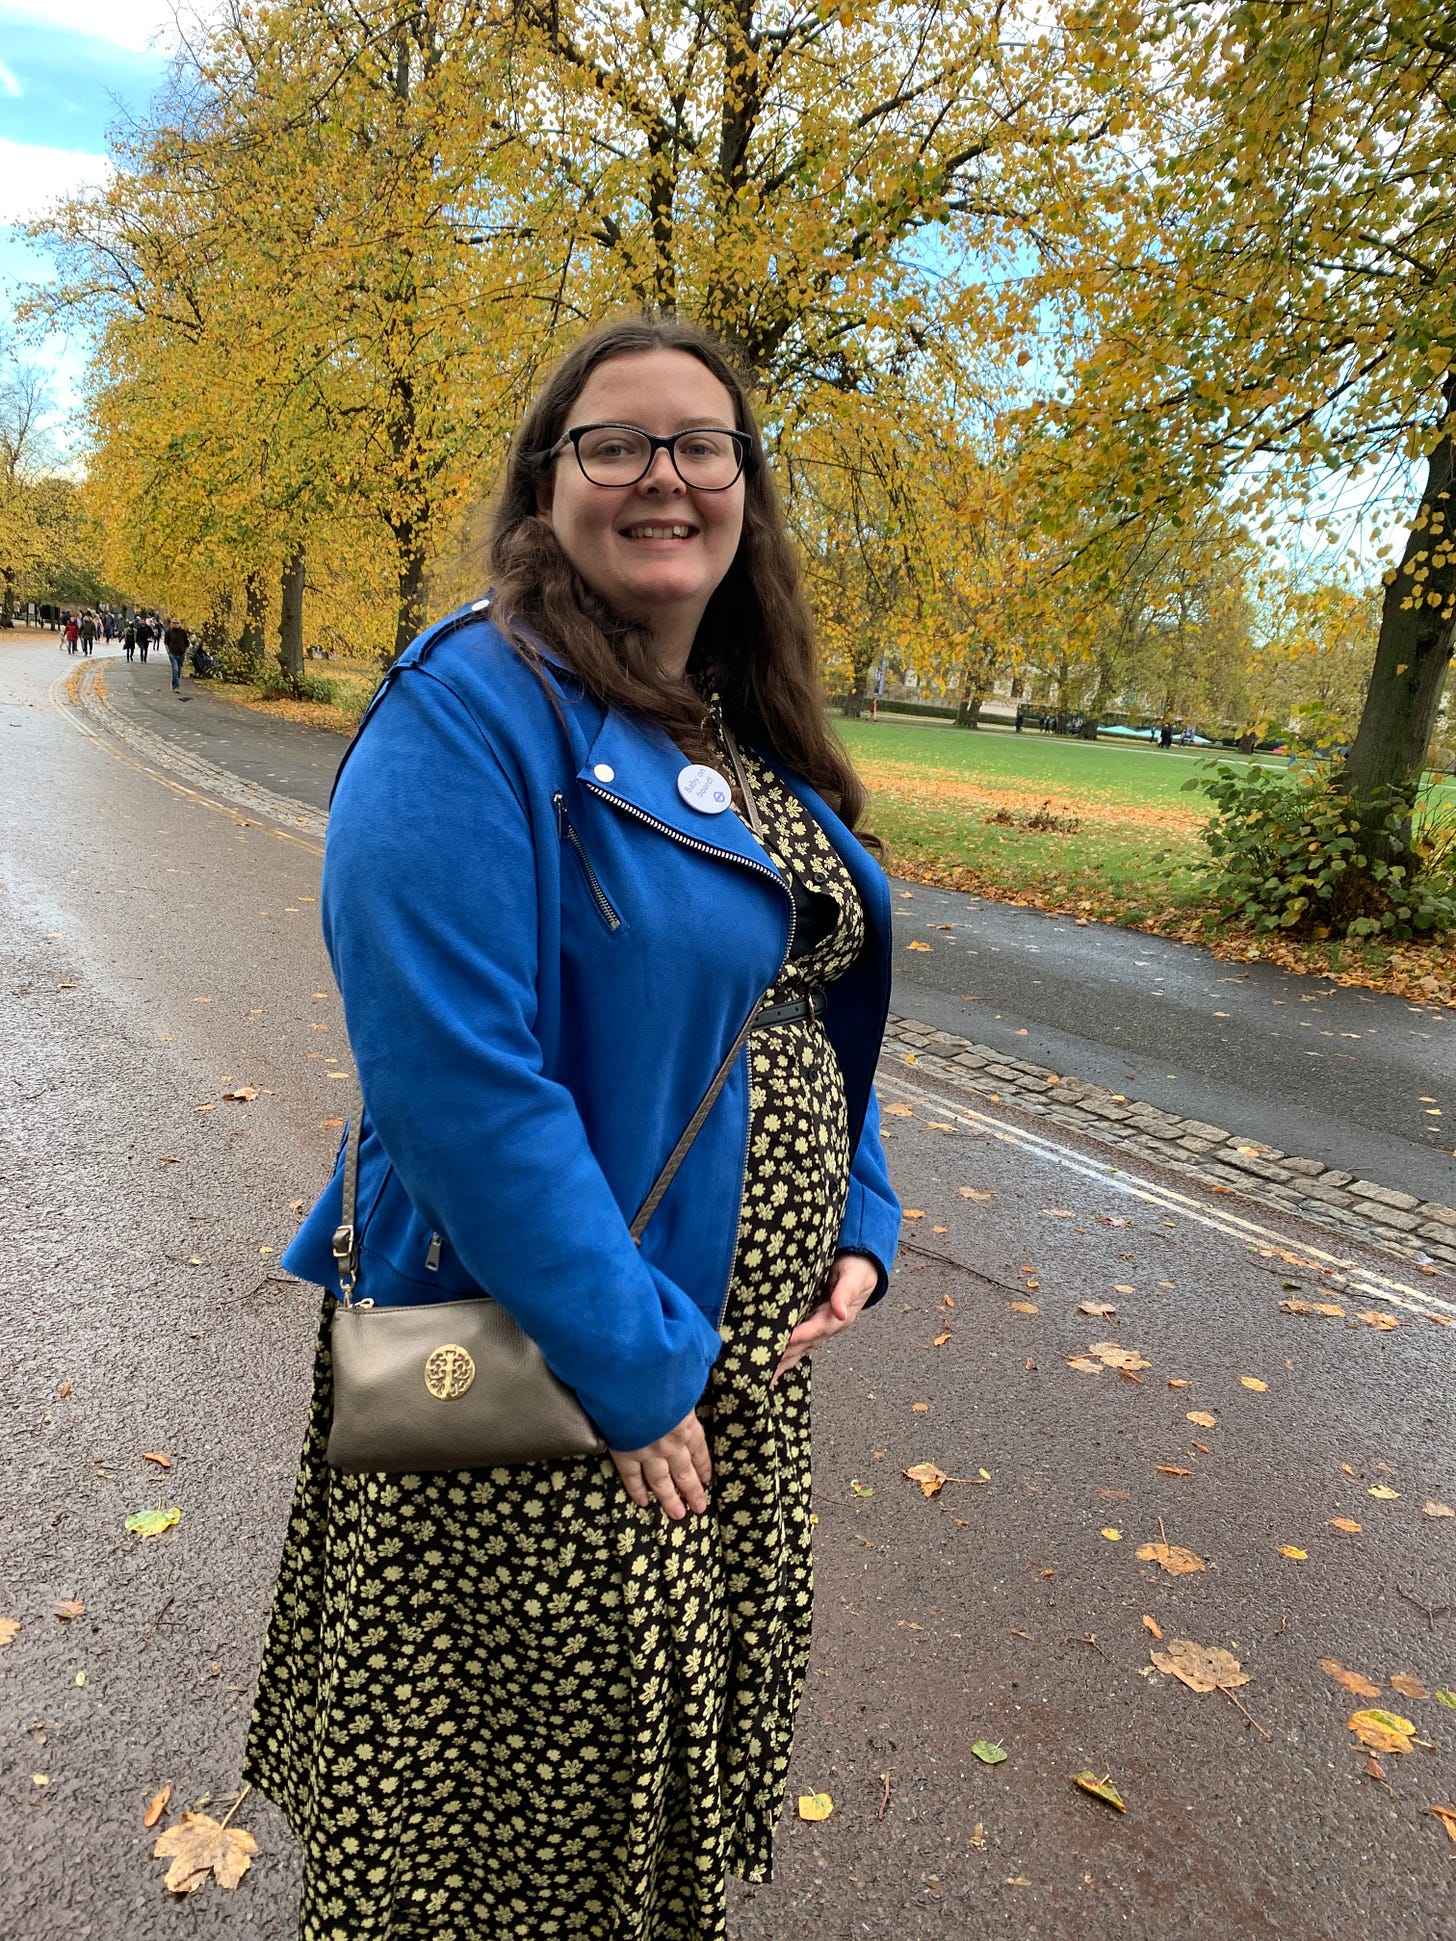 Charlotte, with brown hair and glasses, is cradling a small but growing baby bump and showing off her Baby on Board badge, with an autumnal park in the background